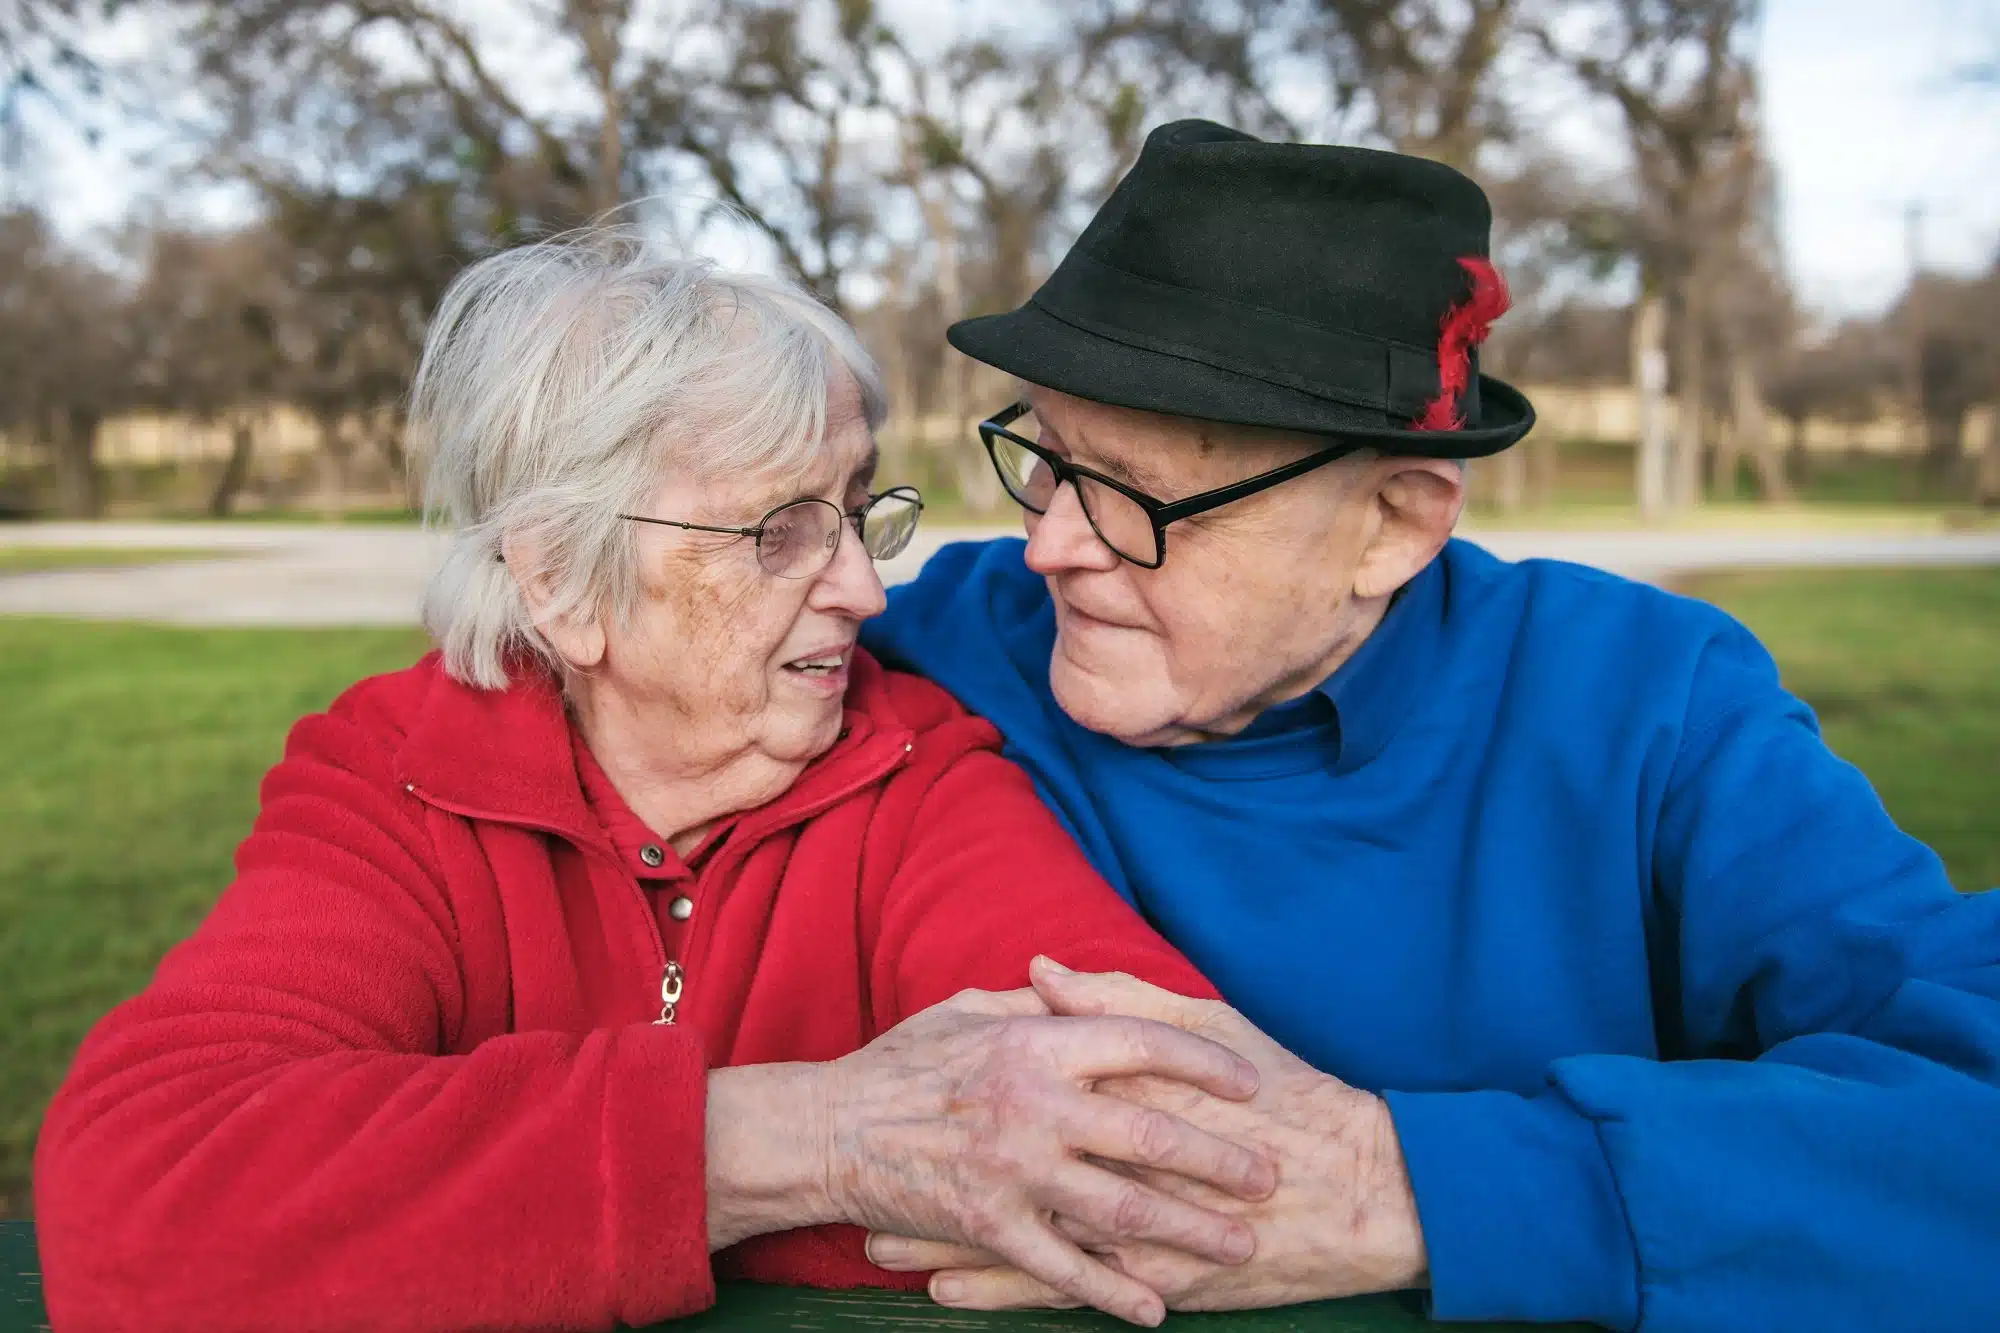 A retired couple looking at each other while holding hands.